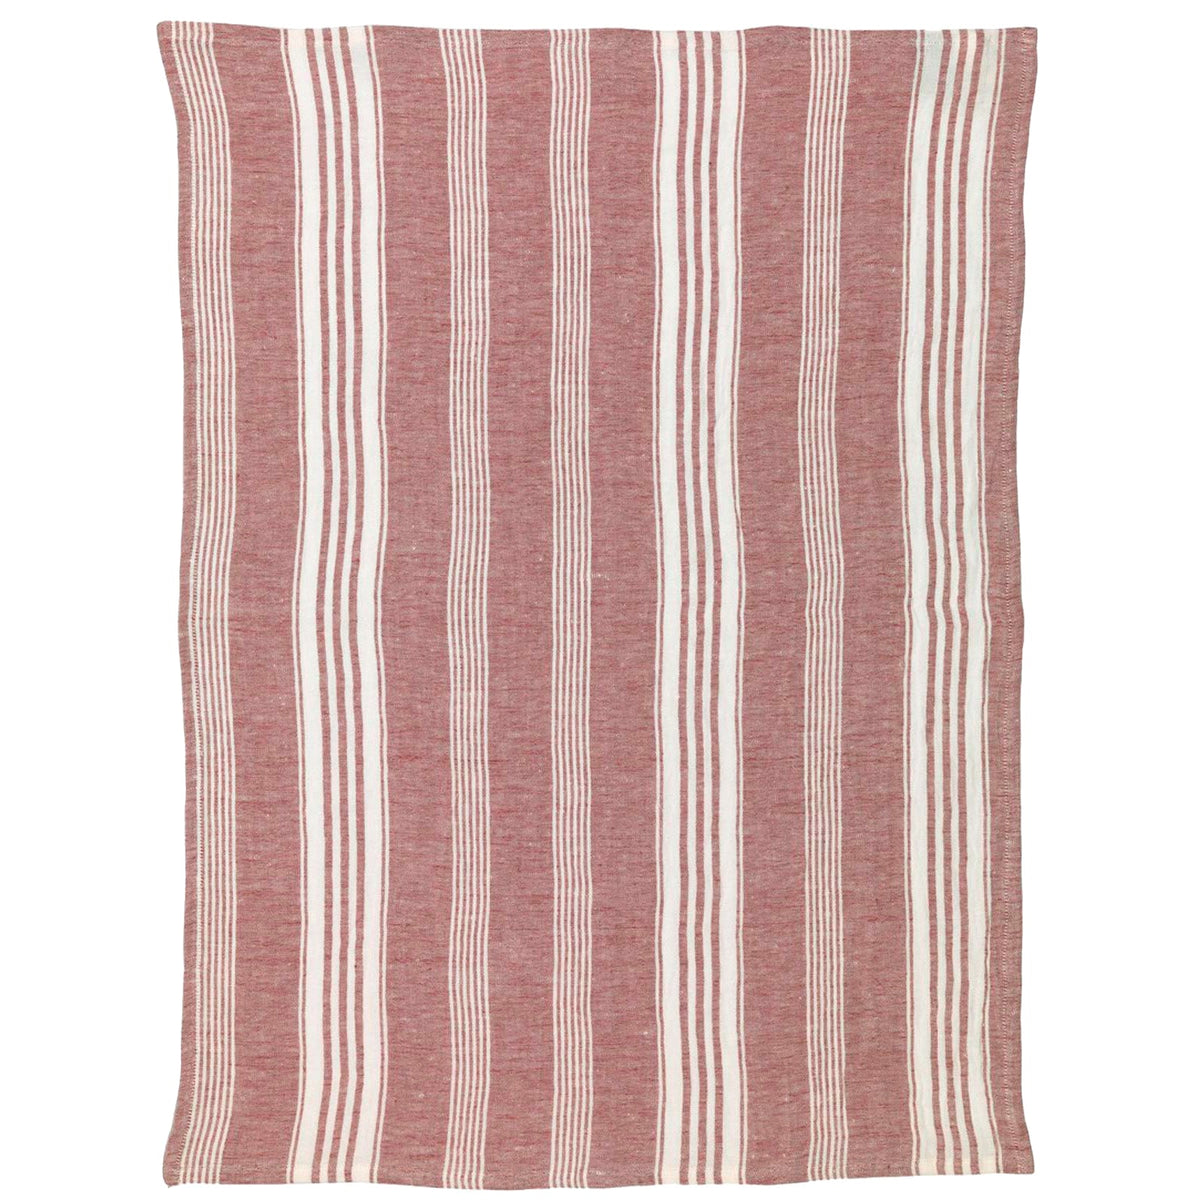 A sustainable Trattoria Rosso Linen Kitchen Towels Set/2 in red and white stripes, inspired by Italy, showcased against a pure white background.